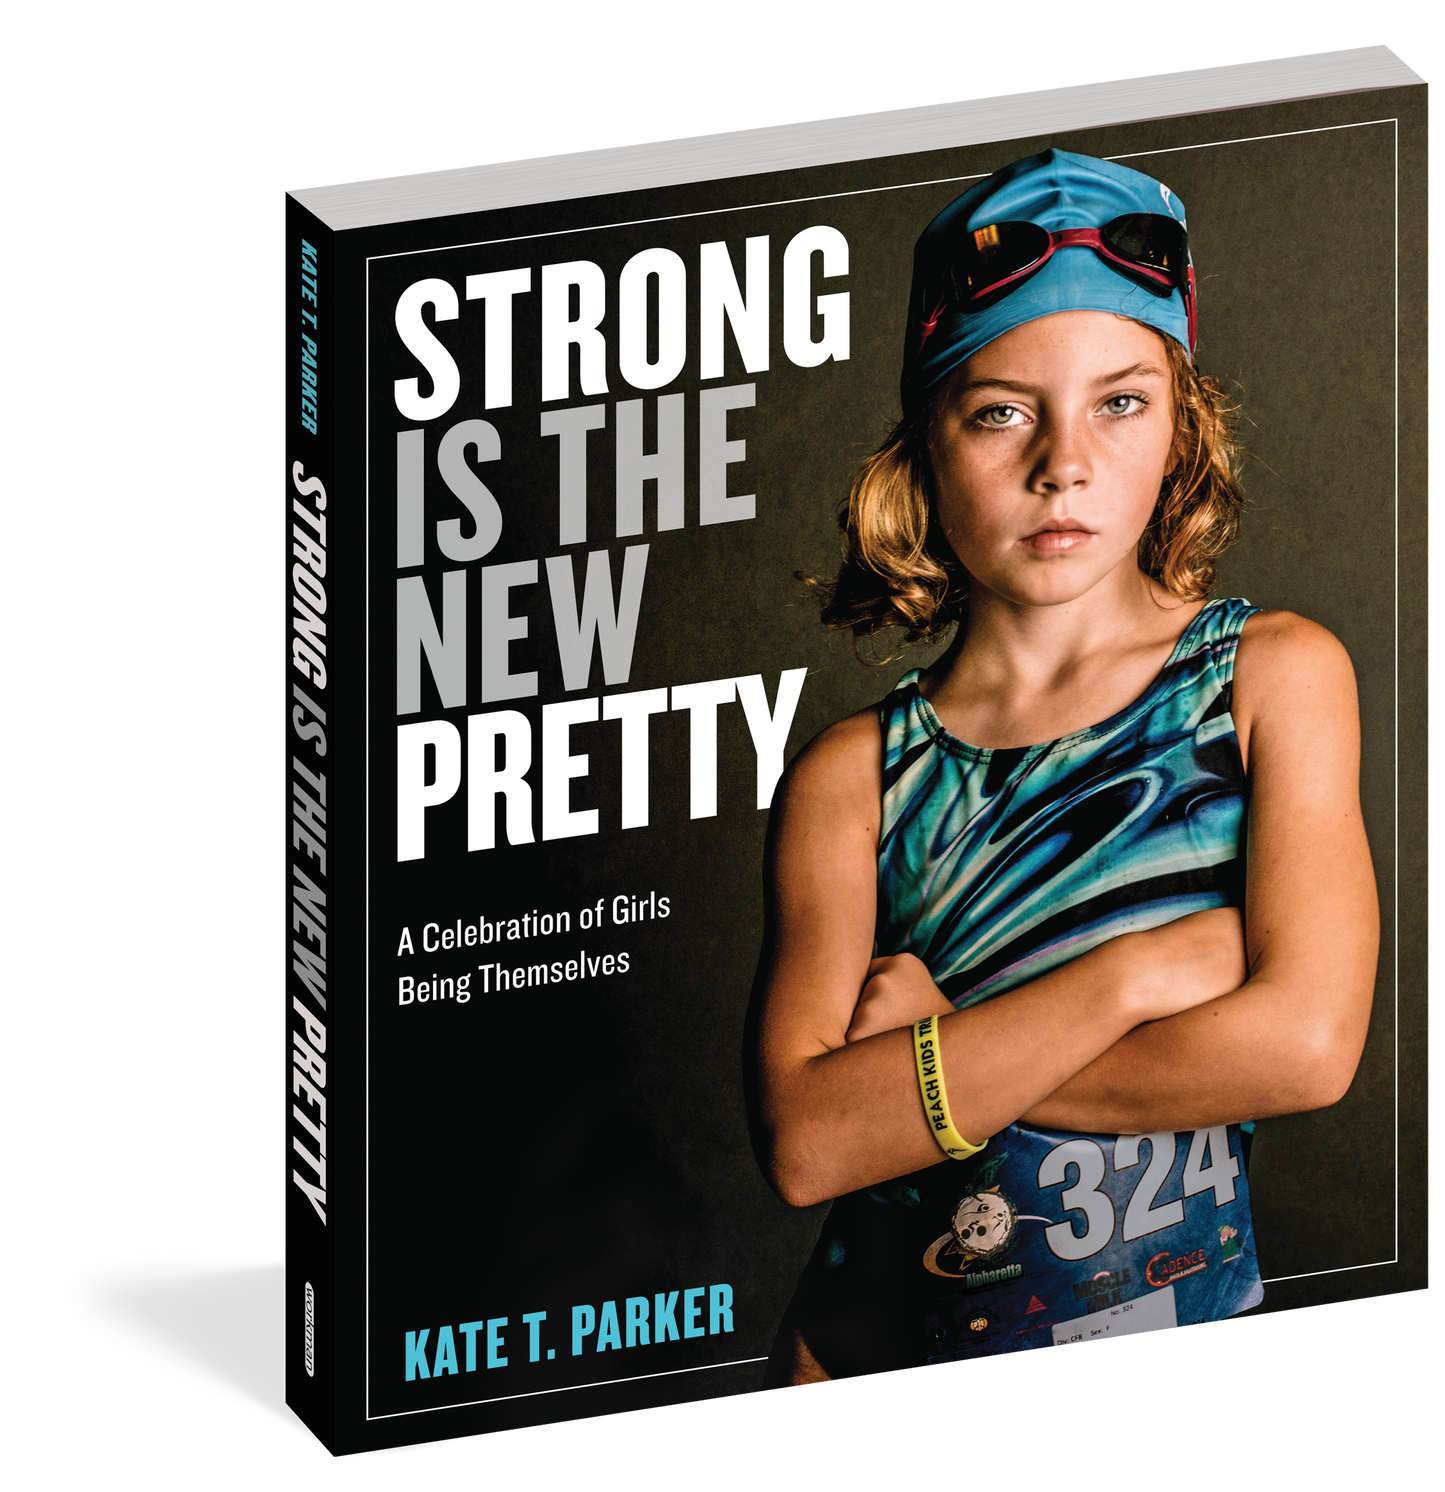 front cover of book has picture of a girl standing with her arms crossed and wearing a swim cap, goggle, and swim suit, title and author's name